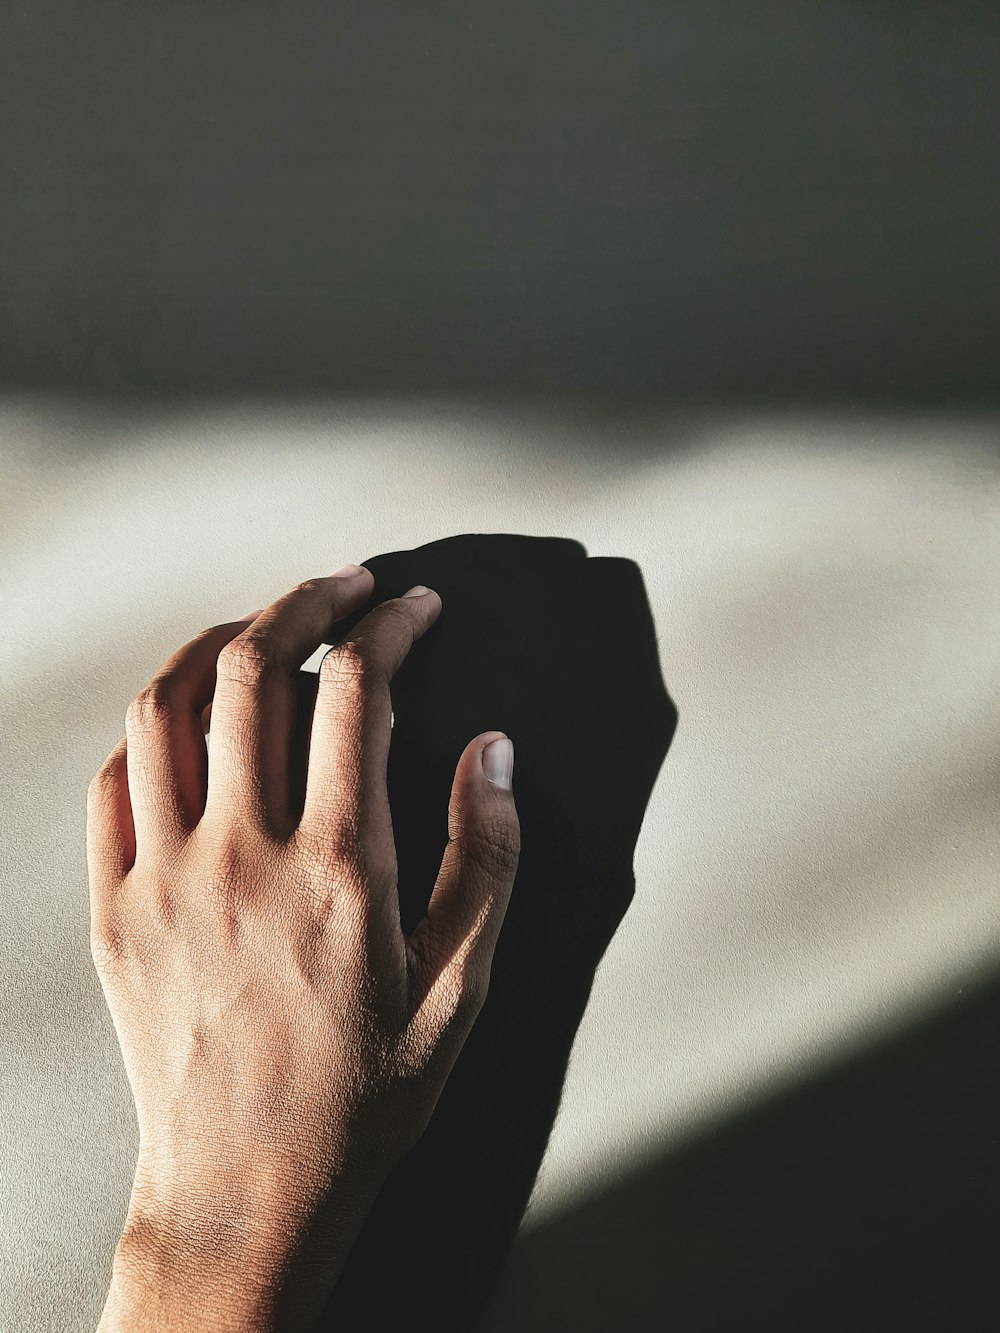 a person's hand on top of a black object